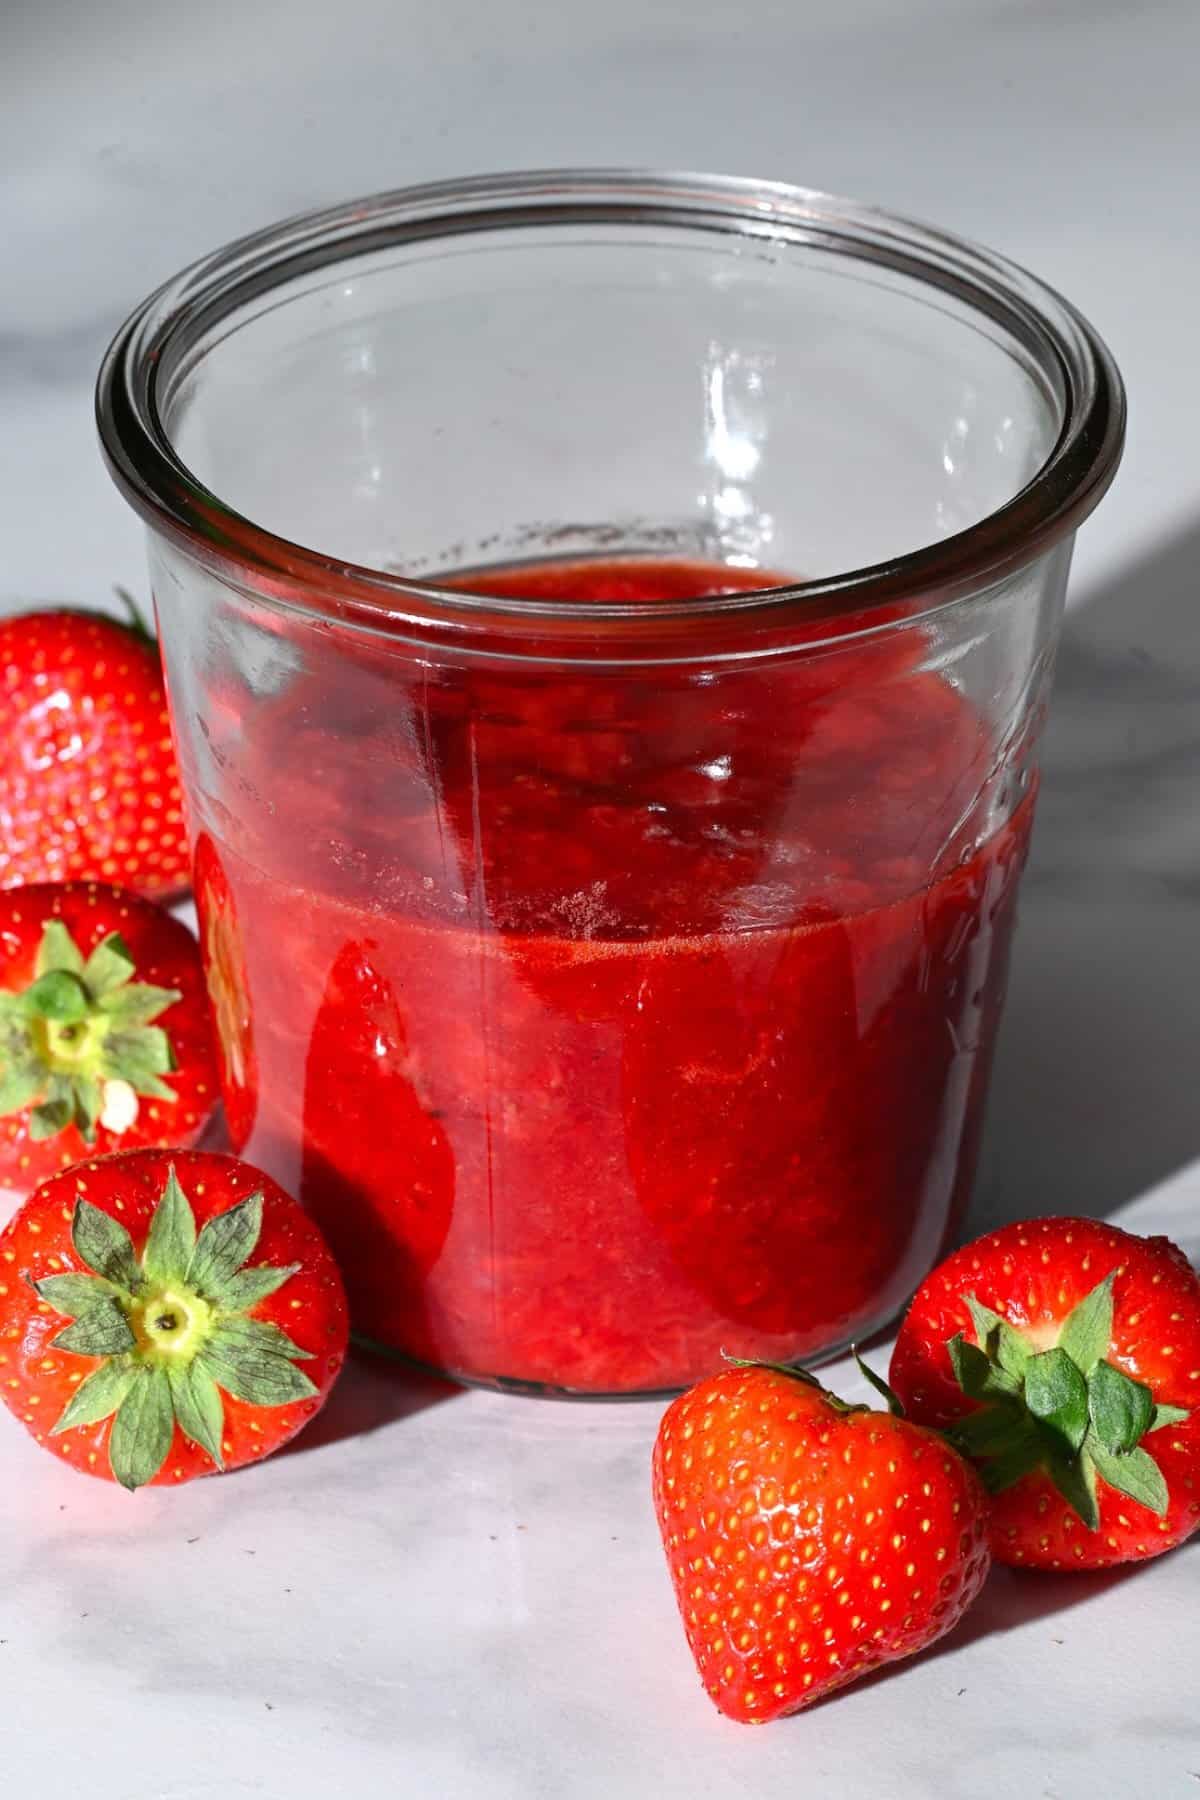 Homemade strawberry compote in a jar